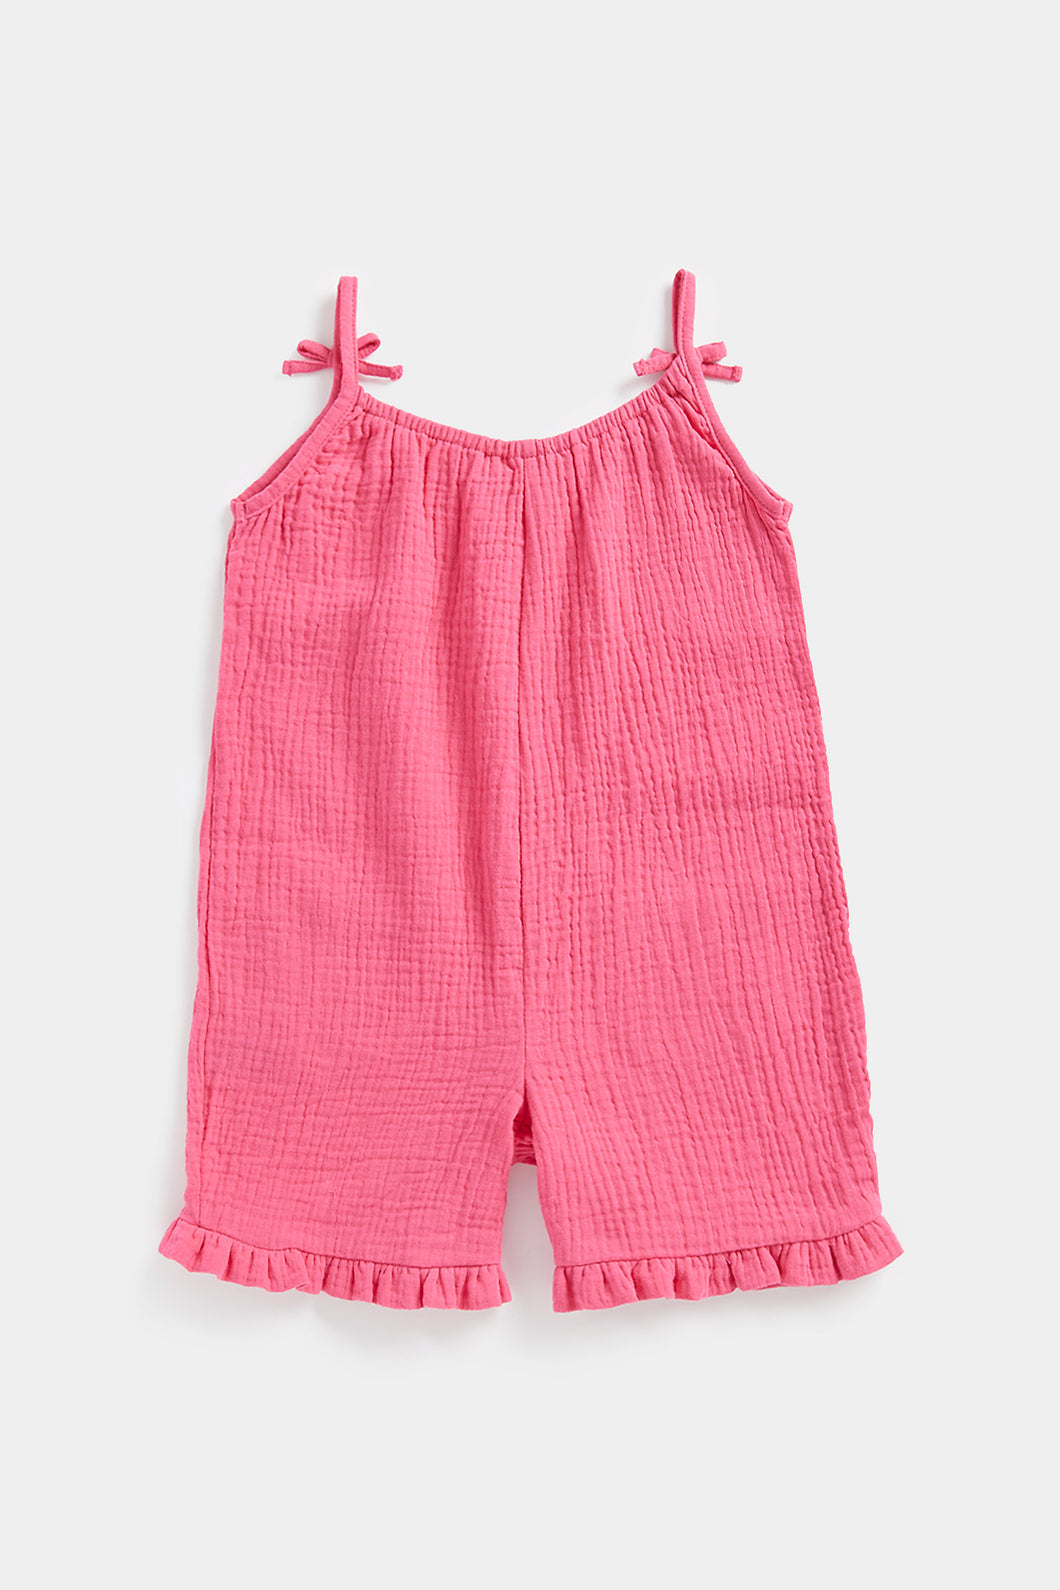 Mothercare Pink Playsuit